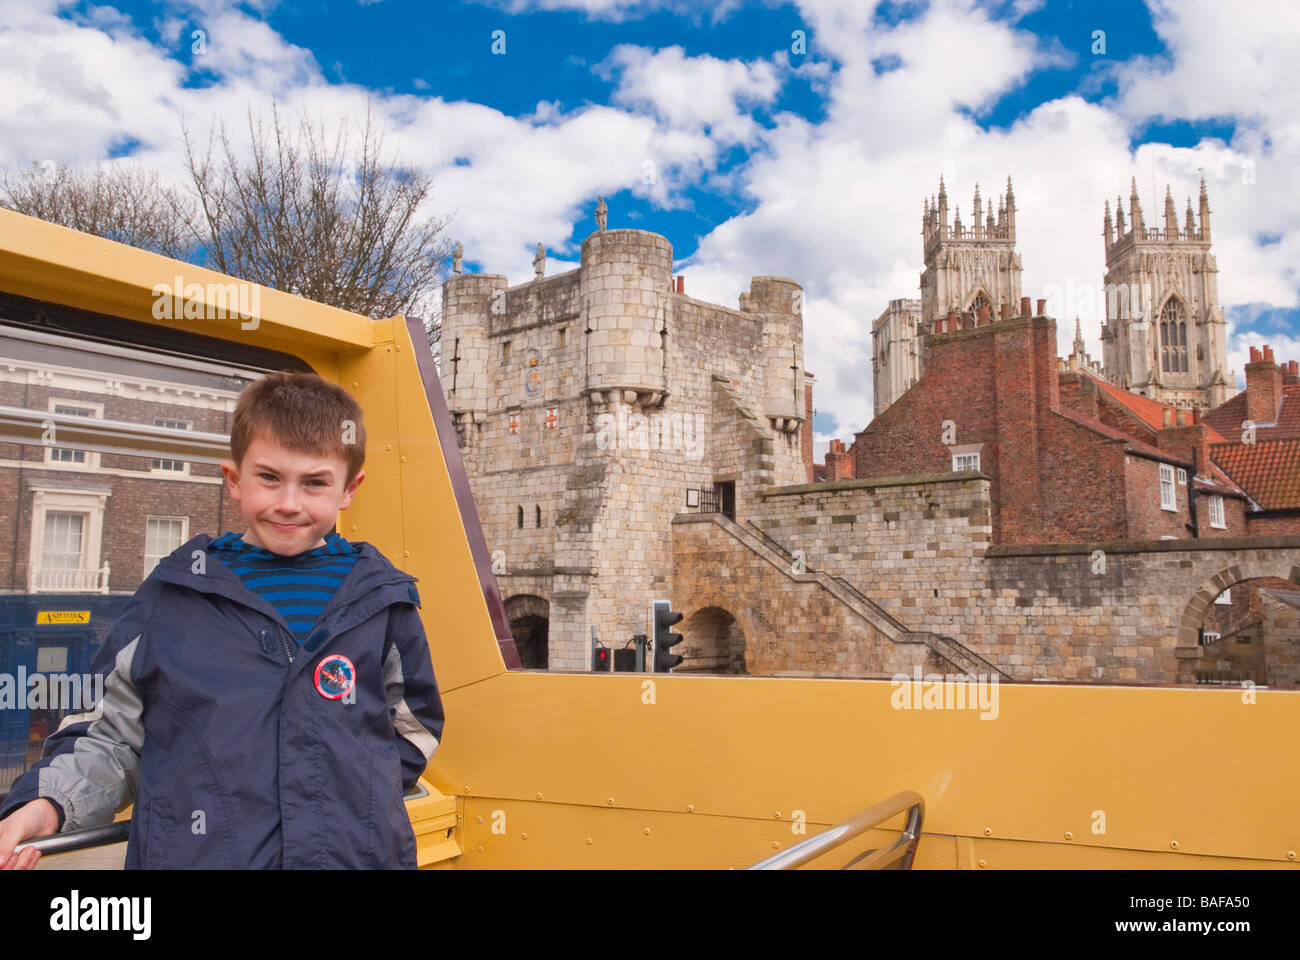 A young boy on the top deck of an open air tour bus in the city of York,Yorkshire,Uk Stock Photo